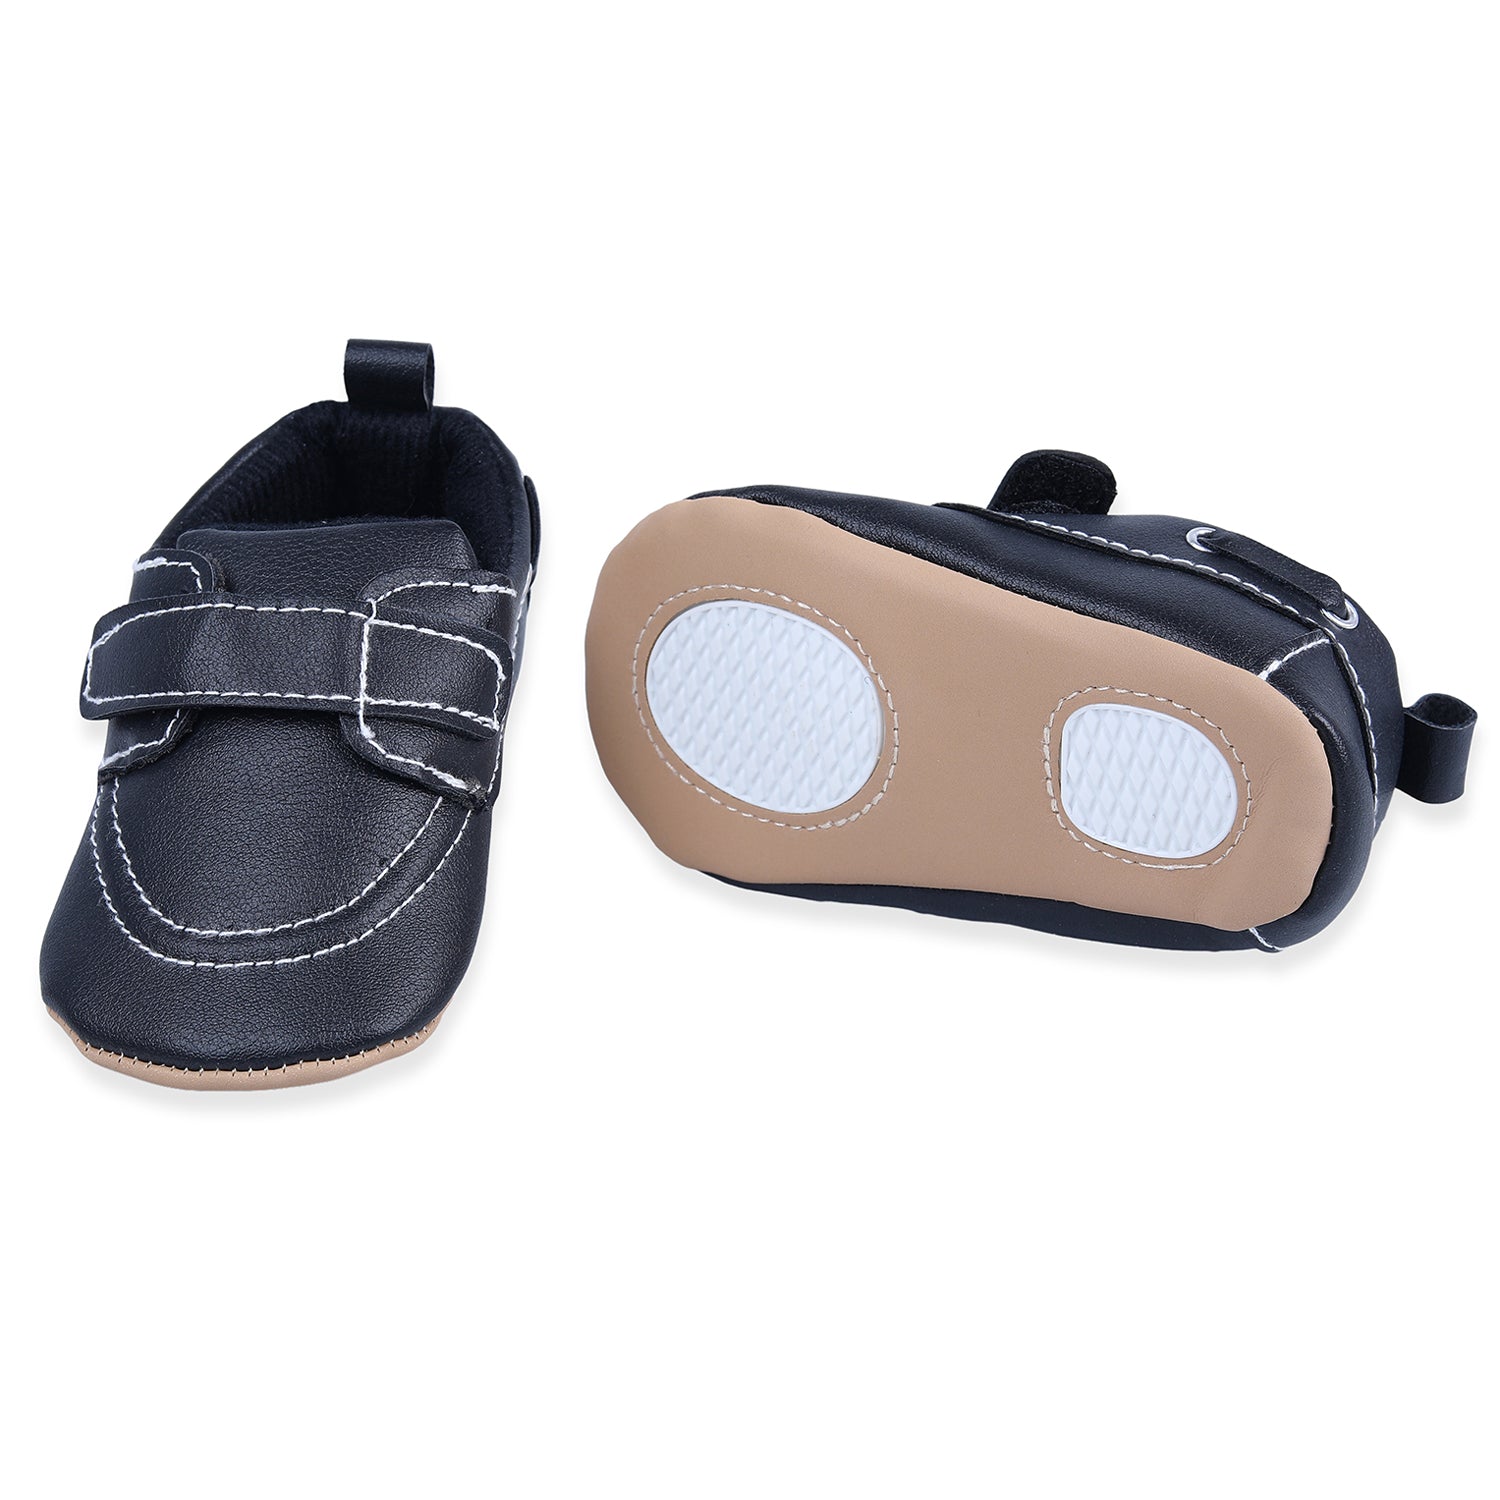 Solid Hookloop Stylish Leather Velcro Shoes - Black - Baby Moo